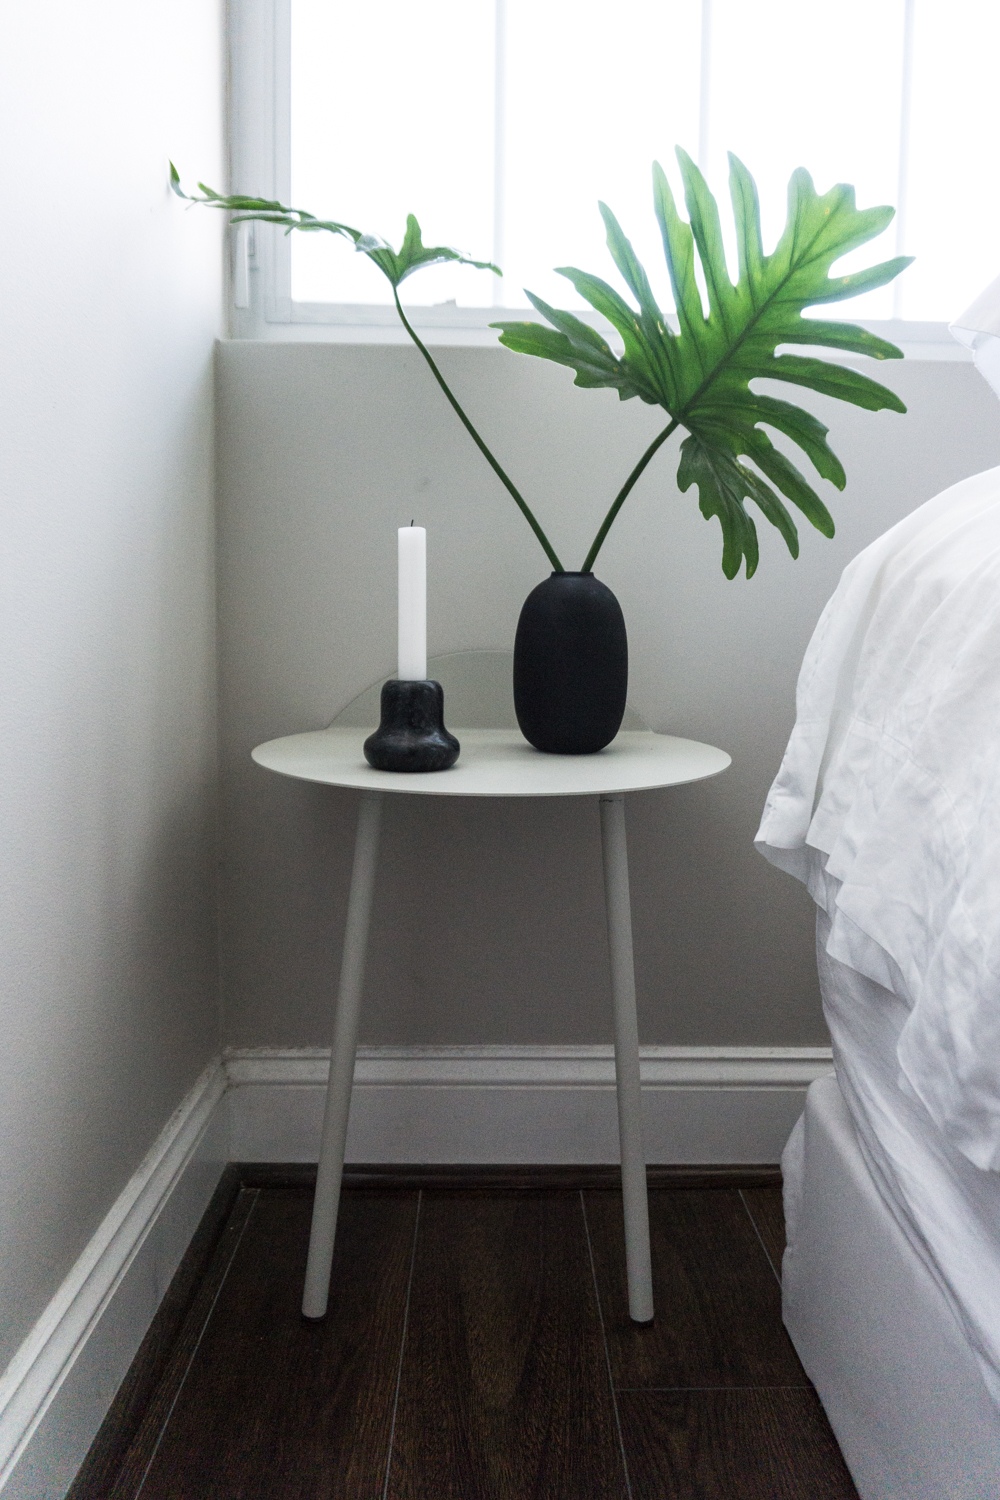 calm bedroom details minimalist home interior style rgdaily blog